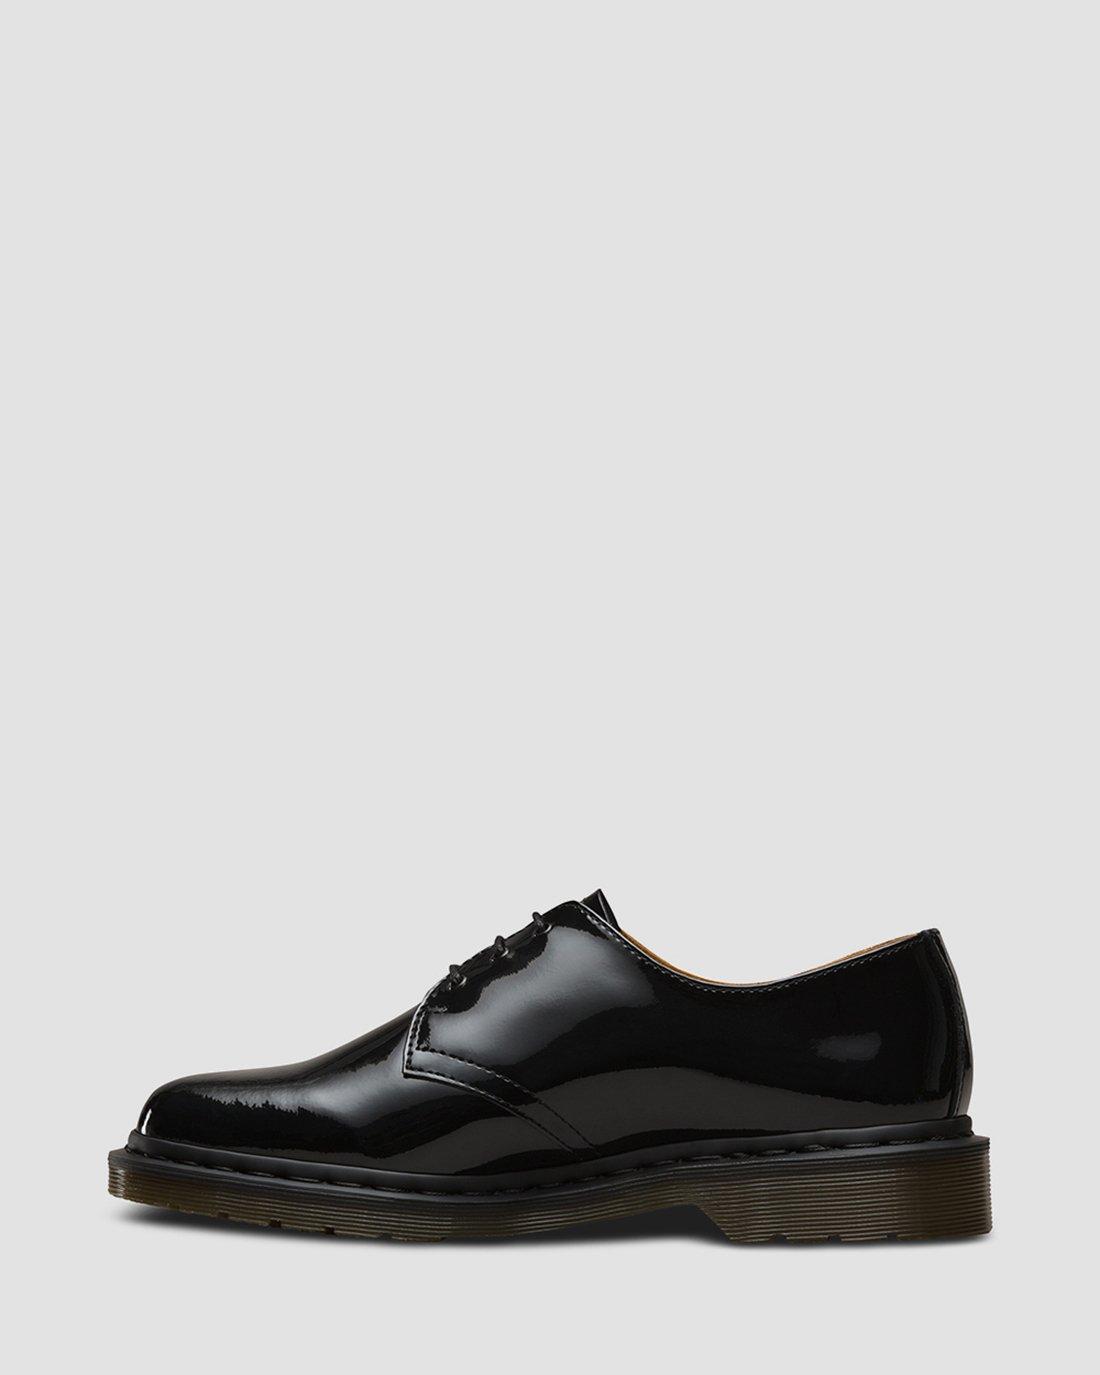 1461 Beams Patent Shoes in Black | Dr. Martens